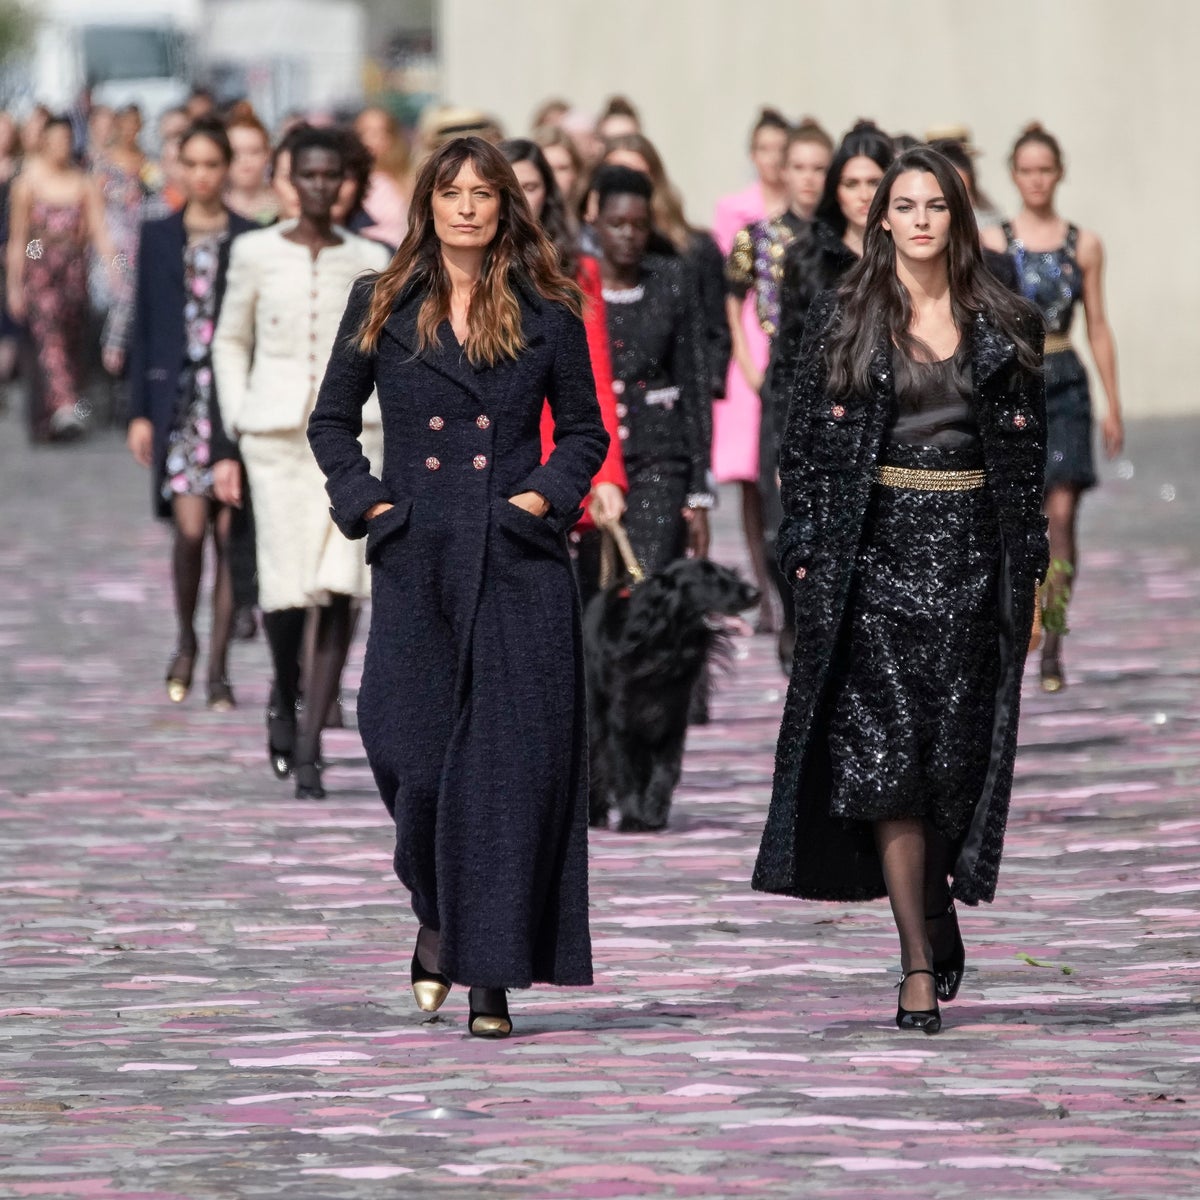 Chanel haute couture makes a subdued ode to Parisian elegance in  fall-winter collection